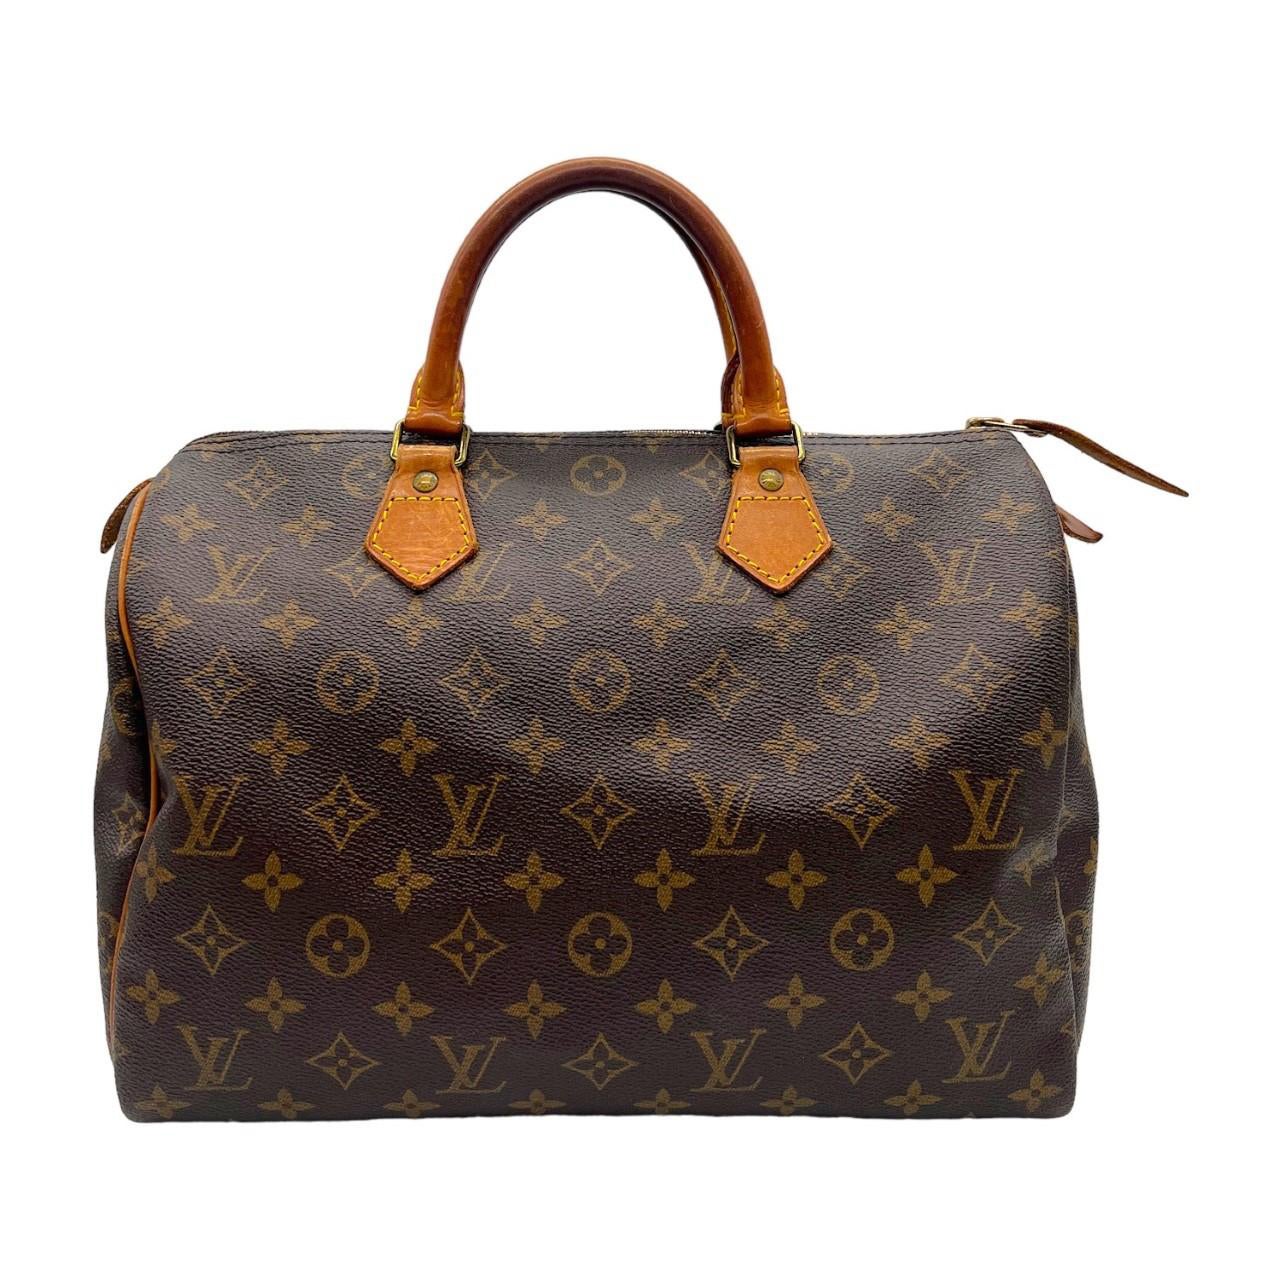 Louis Vuitton 2020 Bag - 38 For Sale on 1stDibs  louis vuitton limited  edition 2020, lv bag 2020, louis vuitton limited edition bags 2020